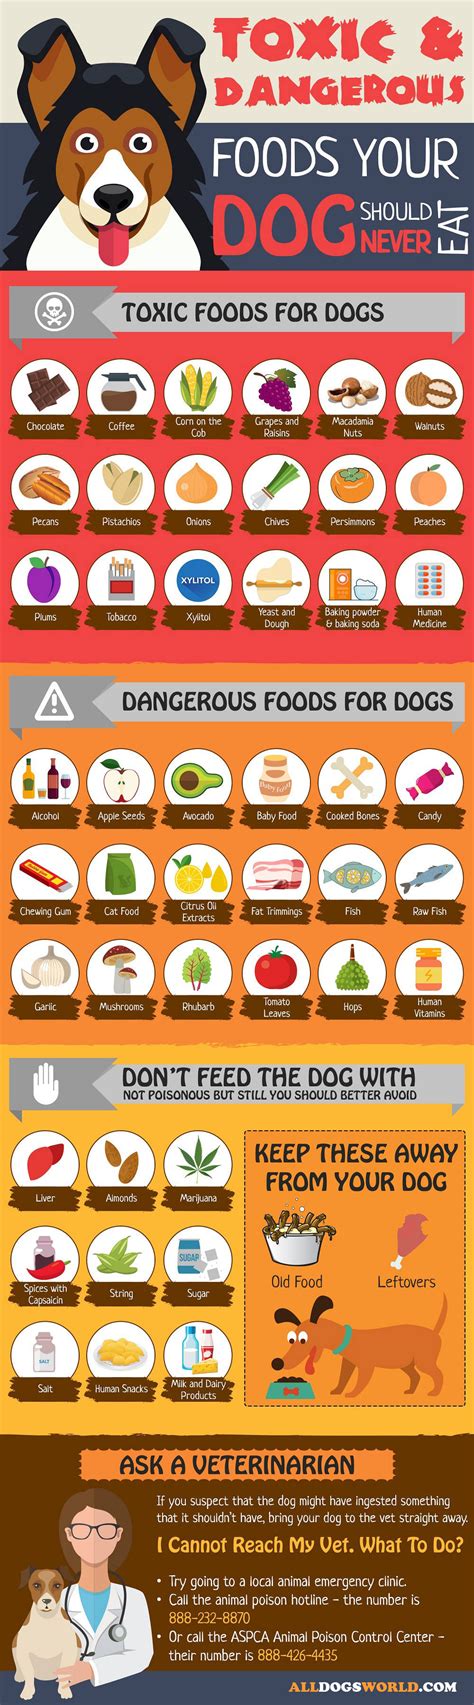 Is Chilli bad for dogs?